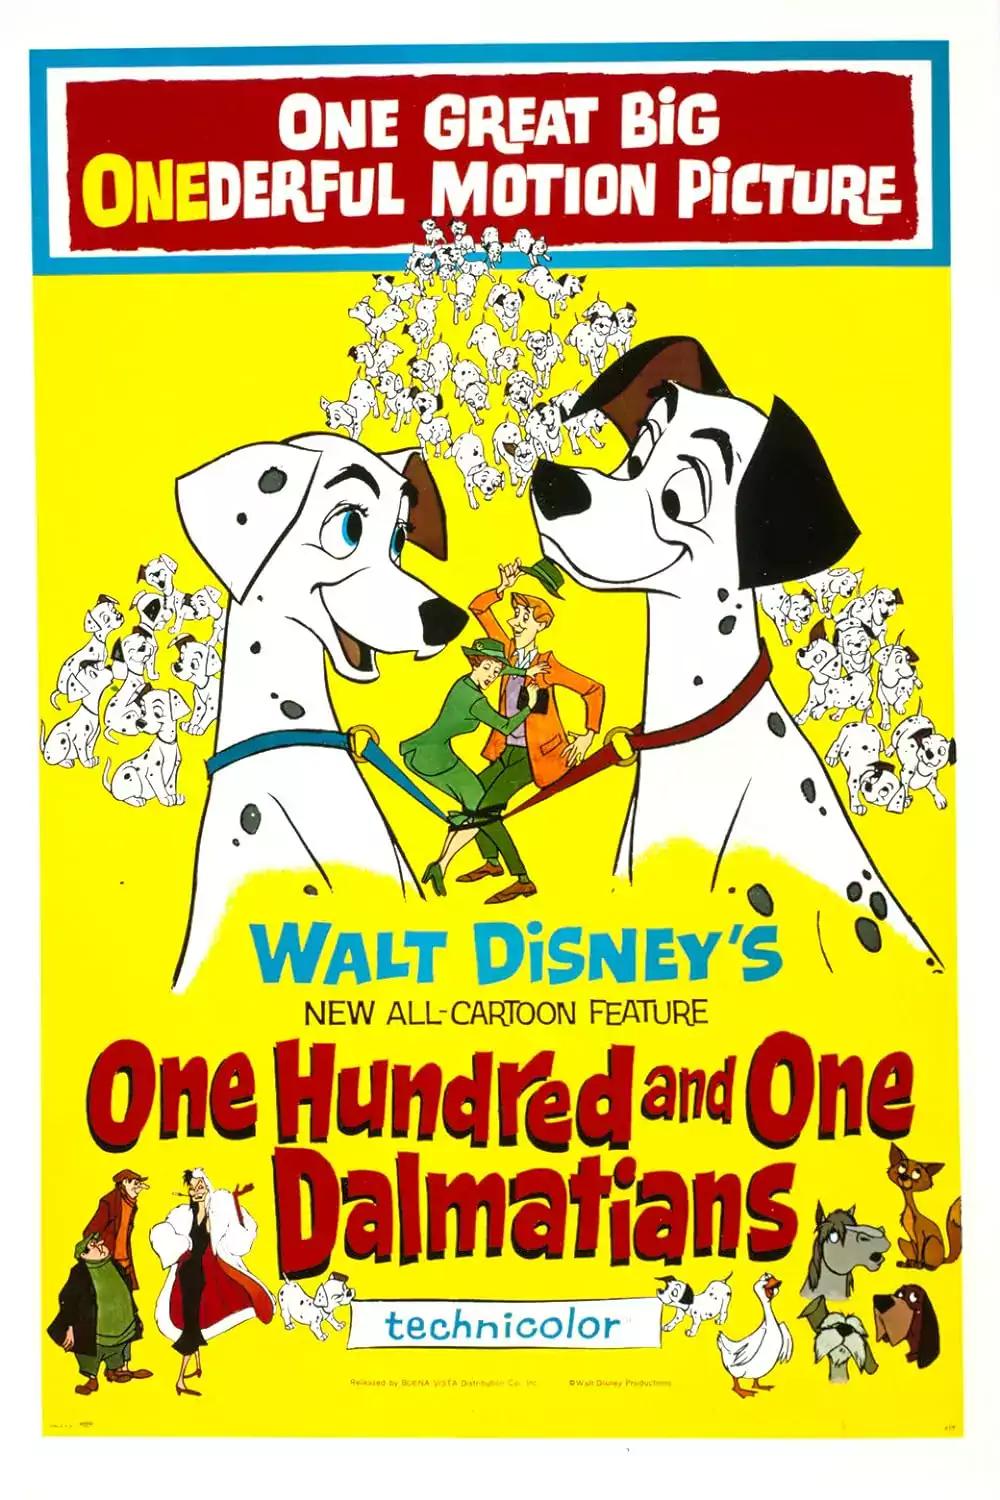 One Hundred and One Dalmatians (1961) - IMDb: 7.3